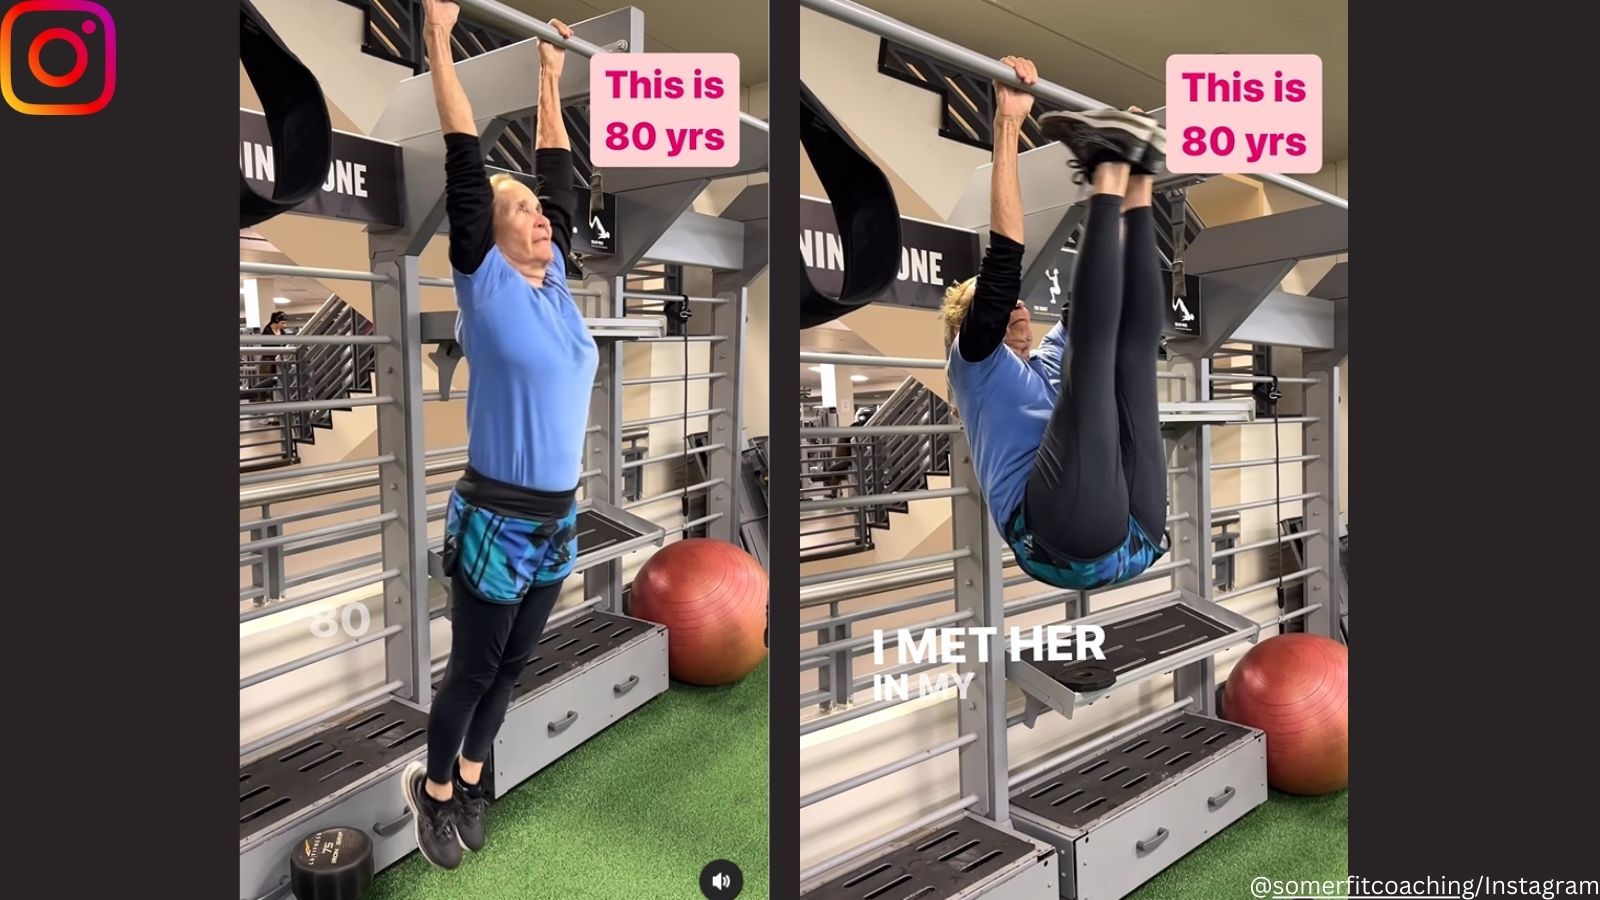 https://images.indianexpress.com/2024/01/80-year-old-woman-showcases-her-incredible-strength-in-gym.jpg